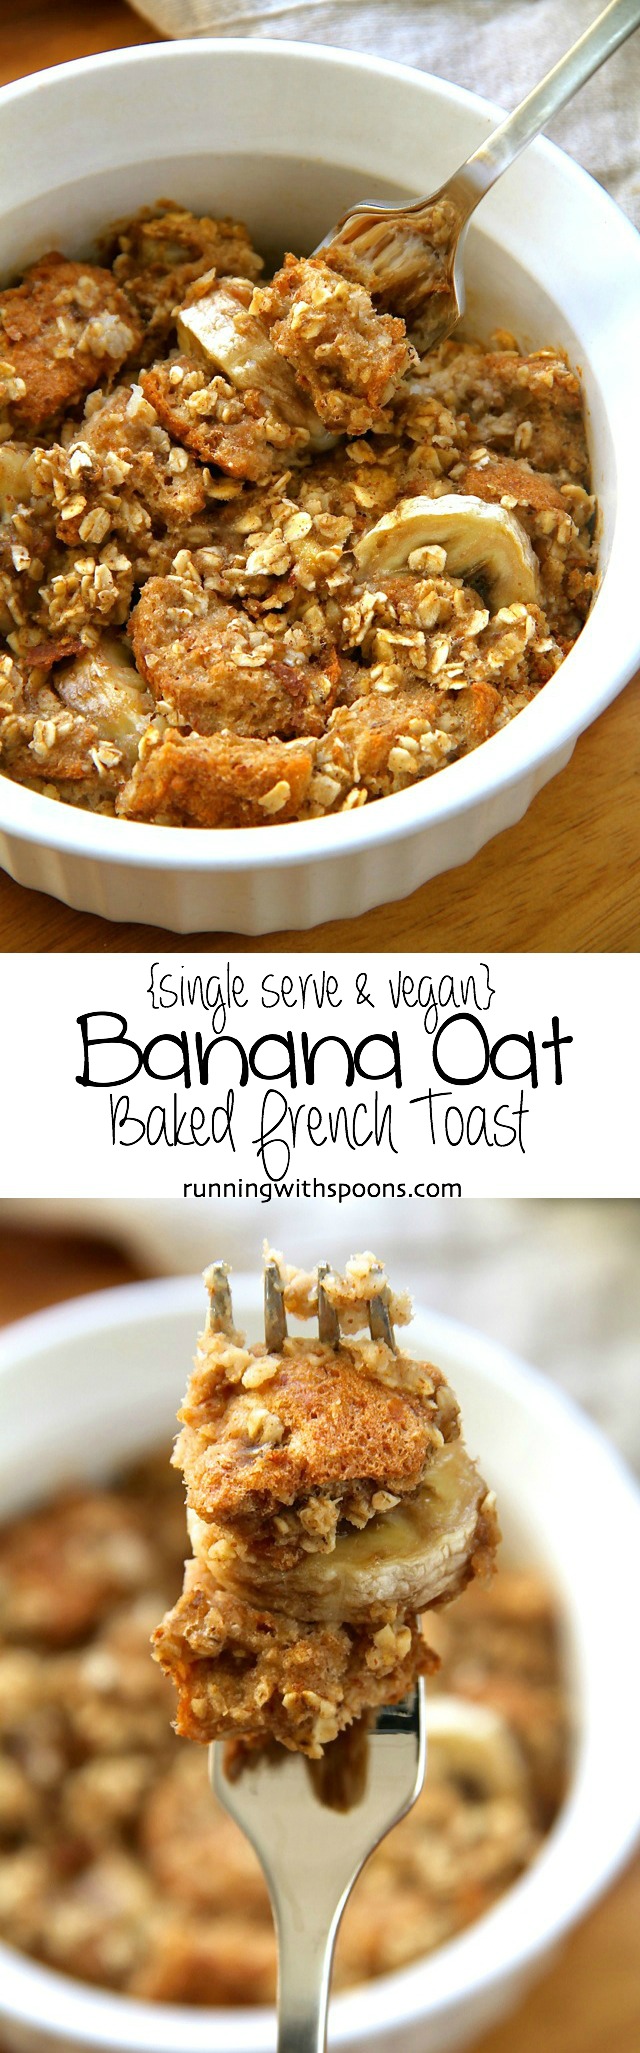 Banana Oat Baked French Toast -- a delicious single serve vegan breakfast that's packed with fibre and plant-based protein! || runningwithspoons.com #vegan #breakfast